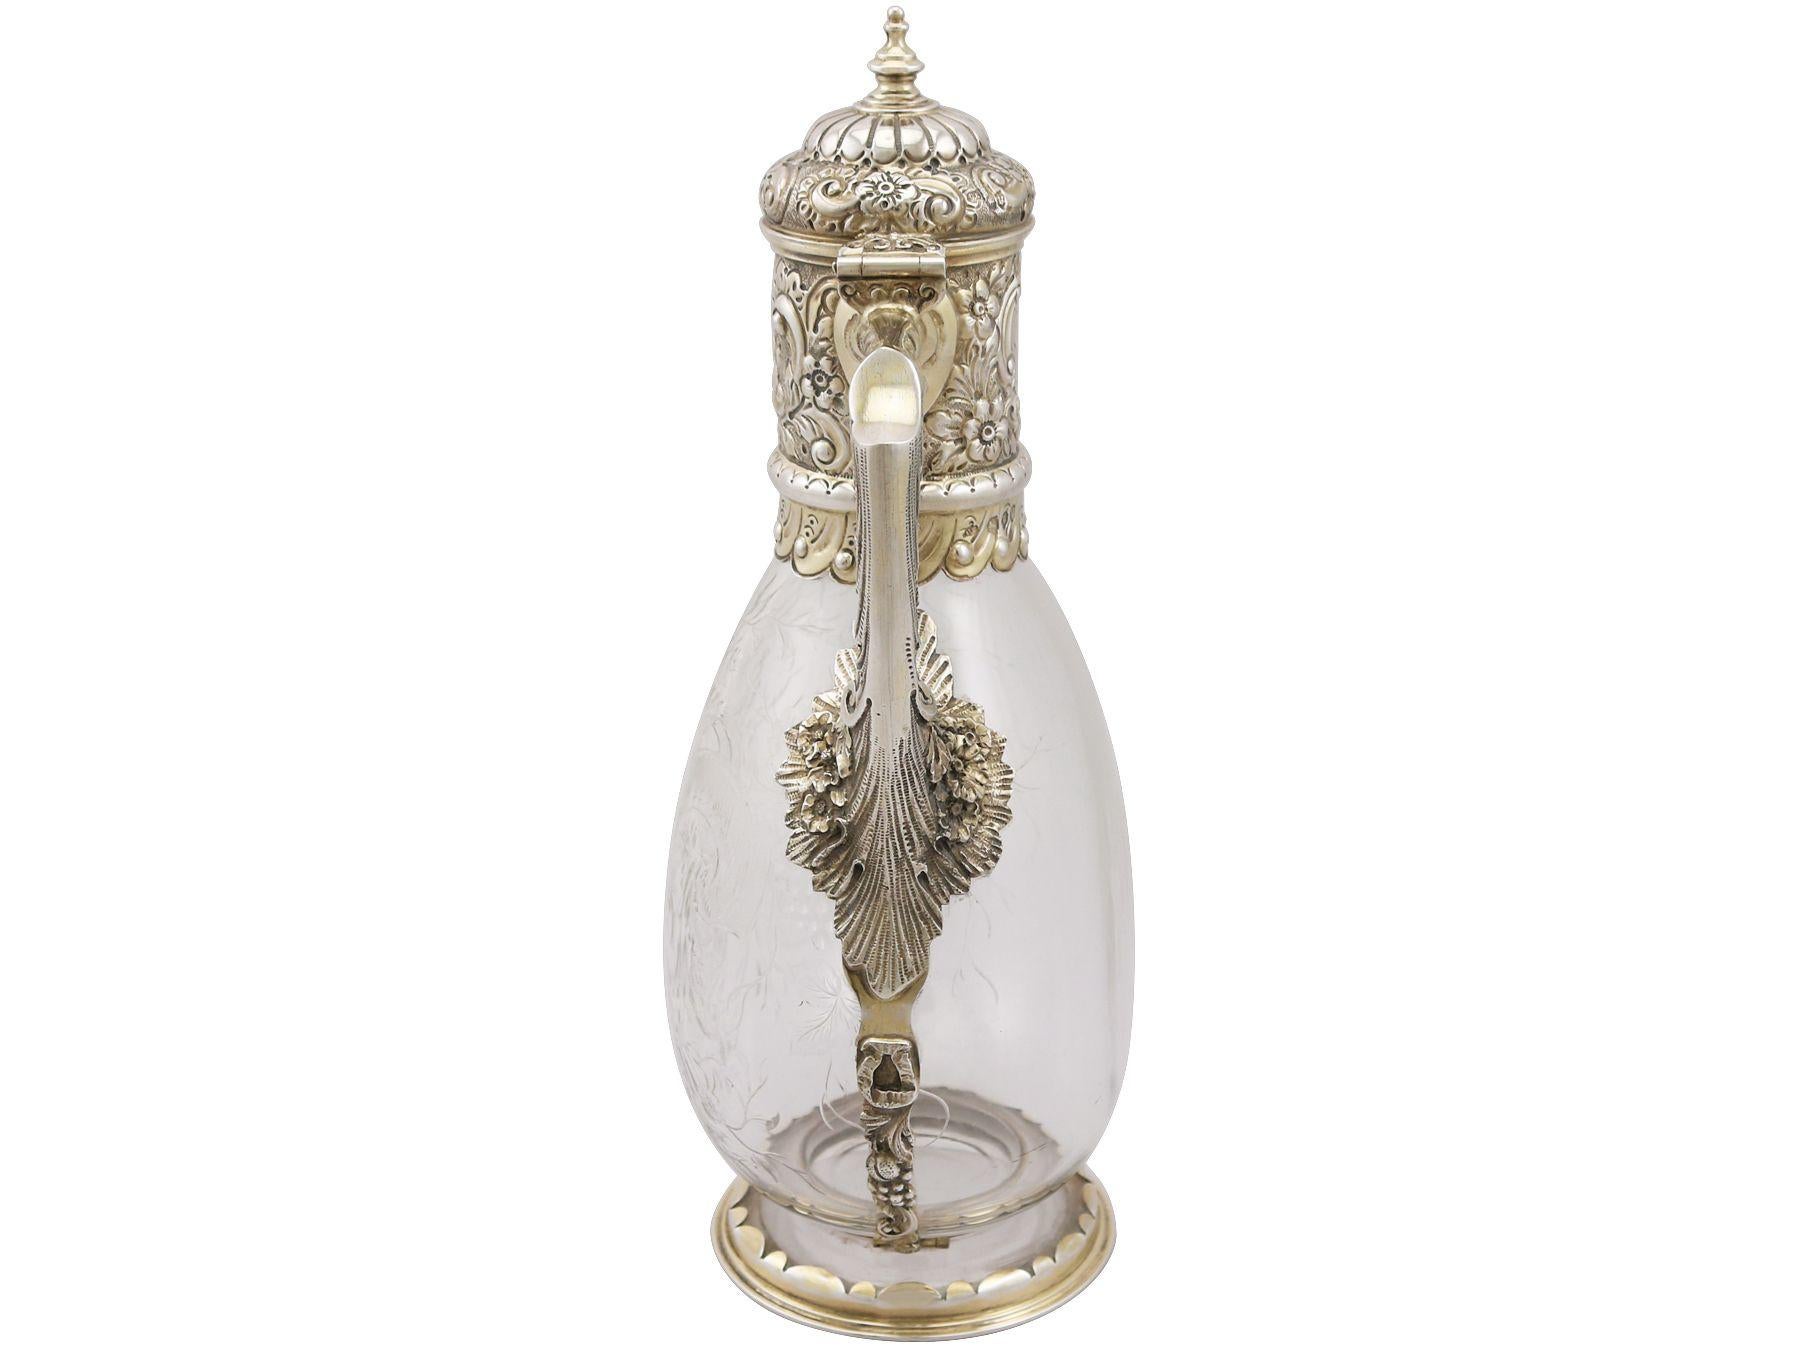 Late 19th Century Glass and Sterling Silver Gilt Mounted Claret Jug, Antique Victorian, '1890'